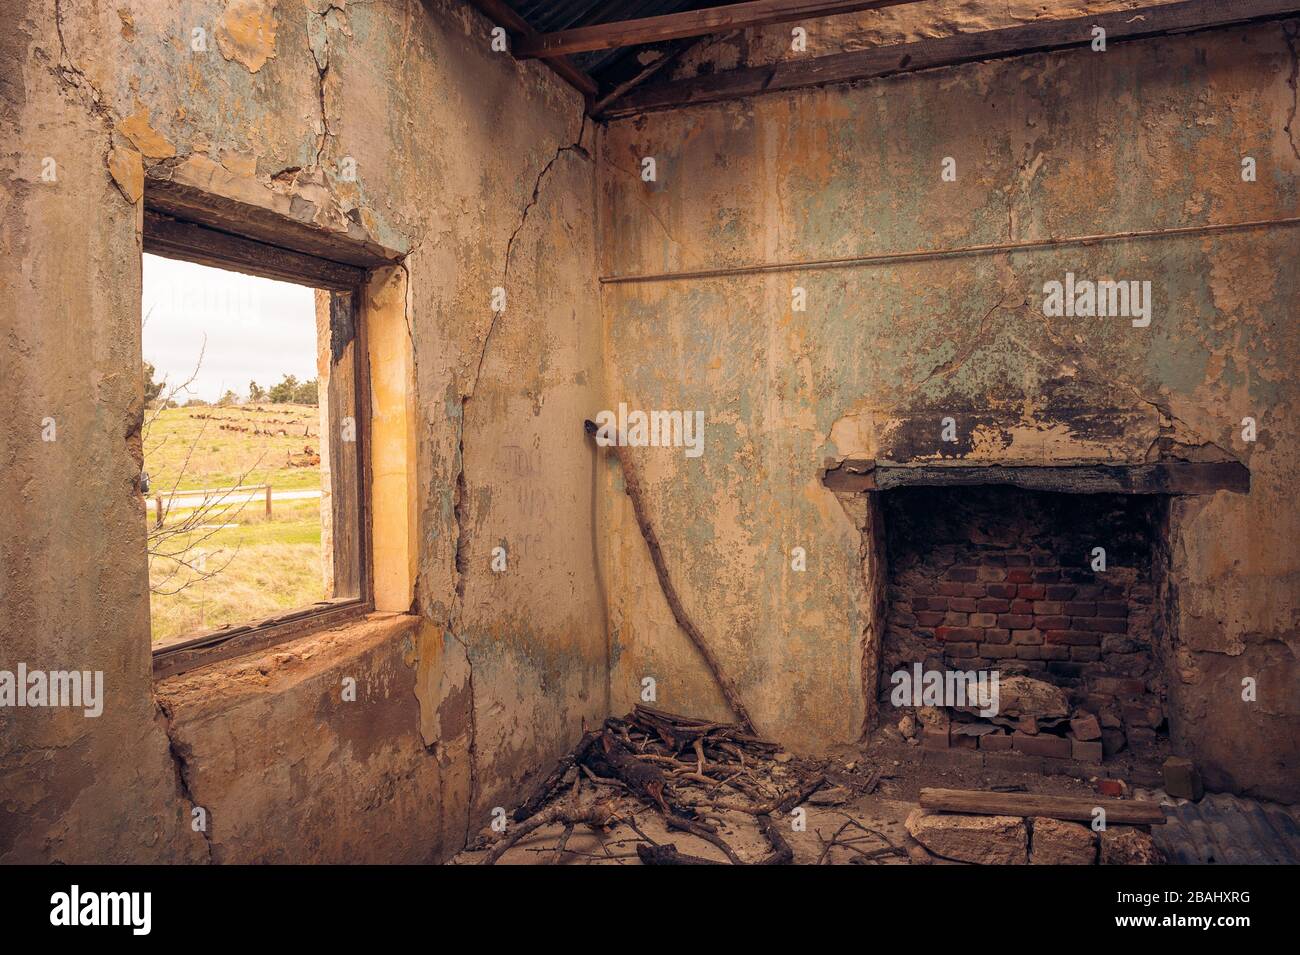 The living room of an old abandoned early settler building looking at the empty fire place and open window looking out on valley in the Flinders Range. Stock Photo